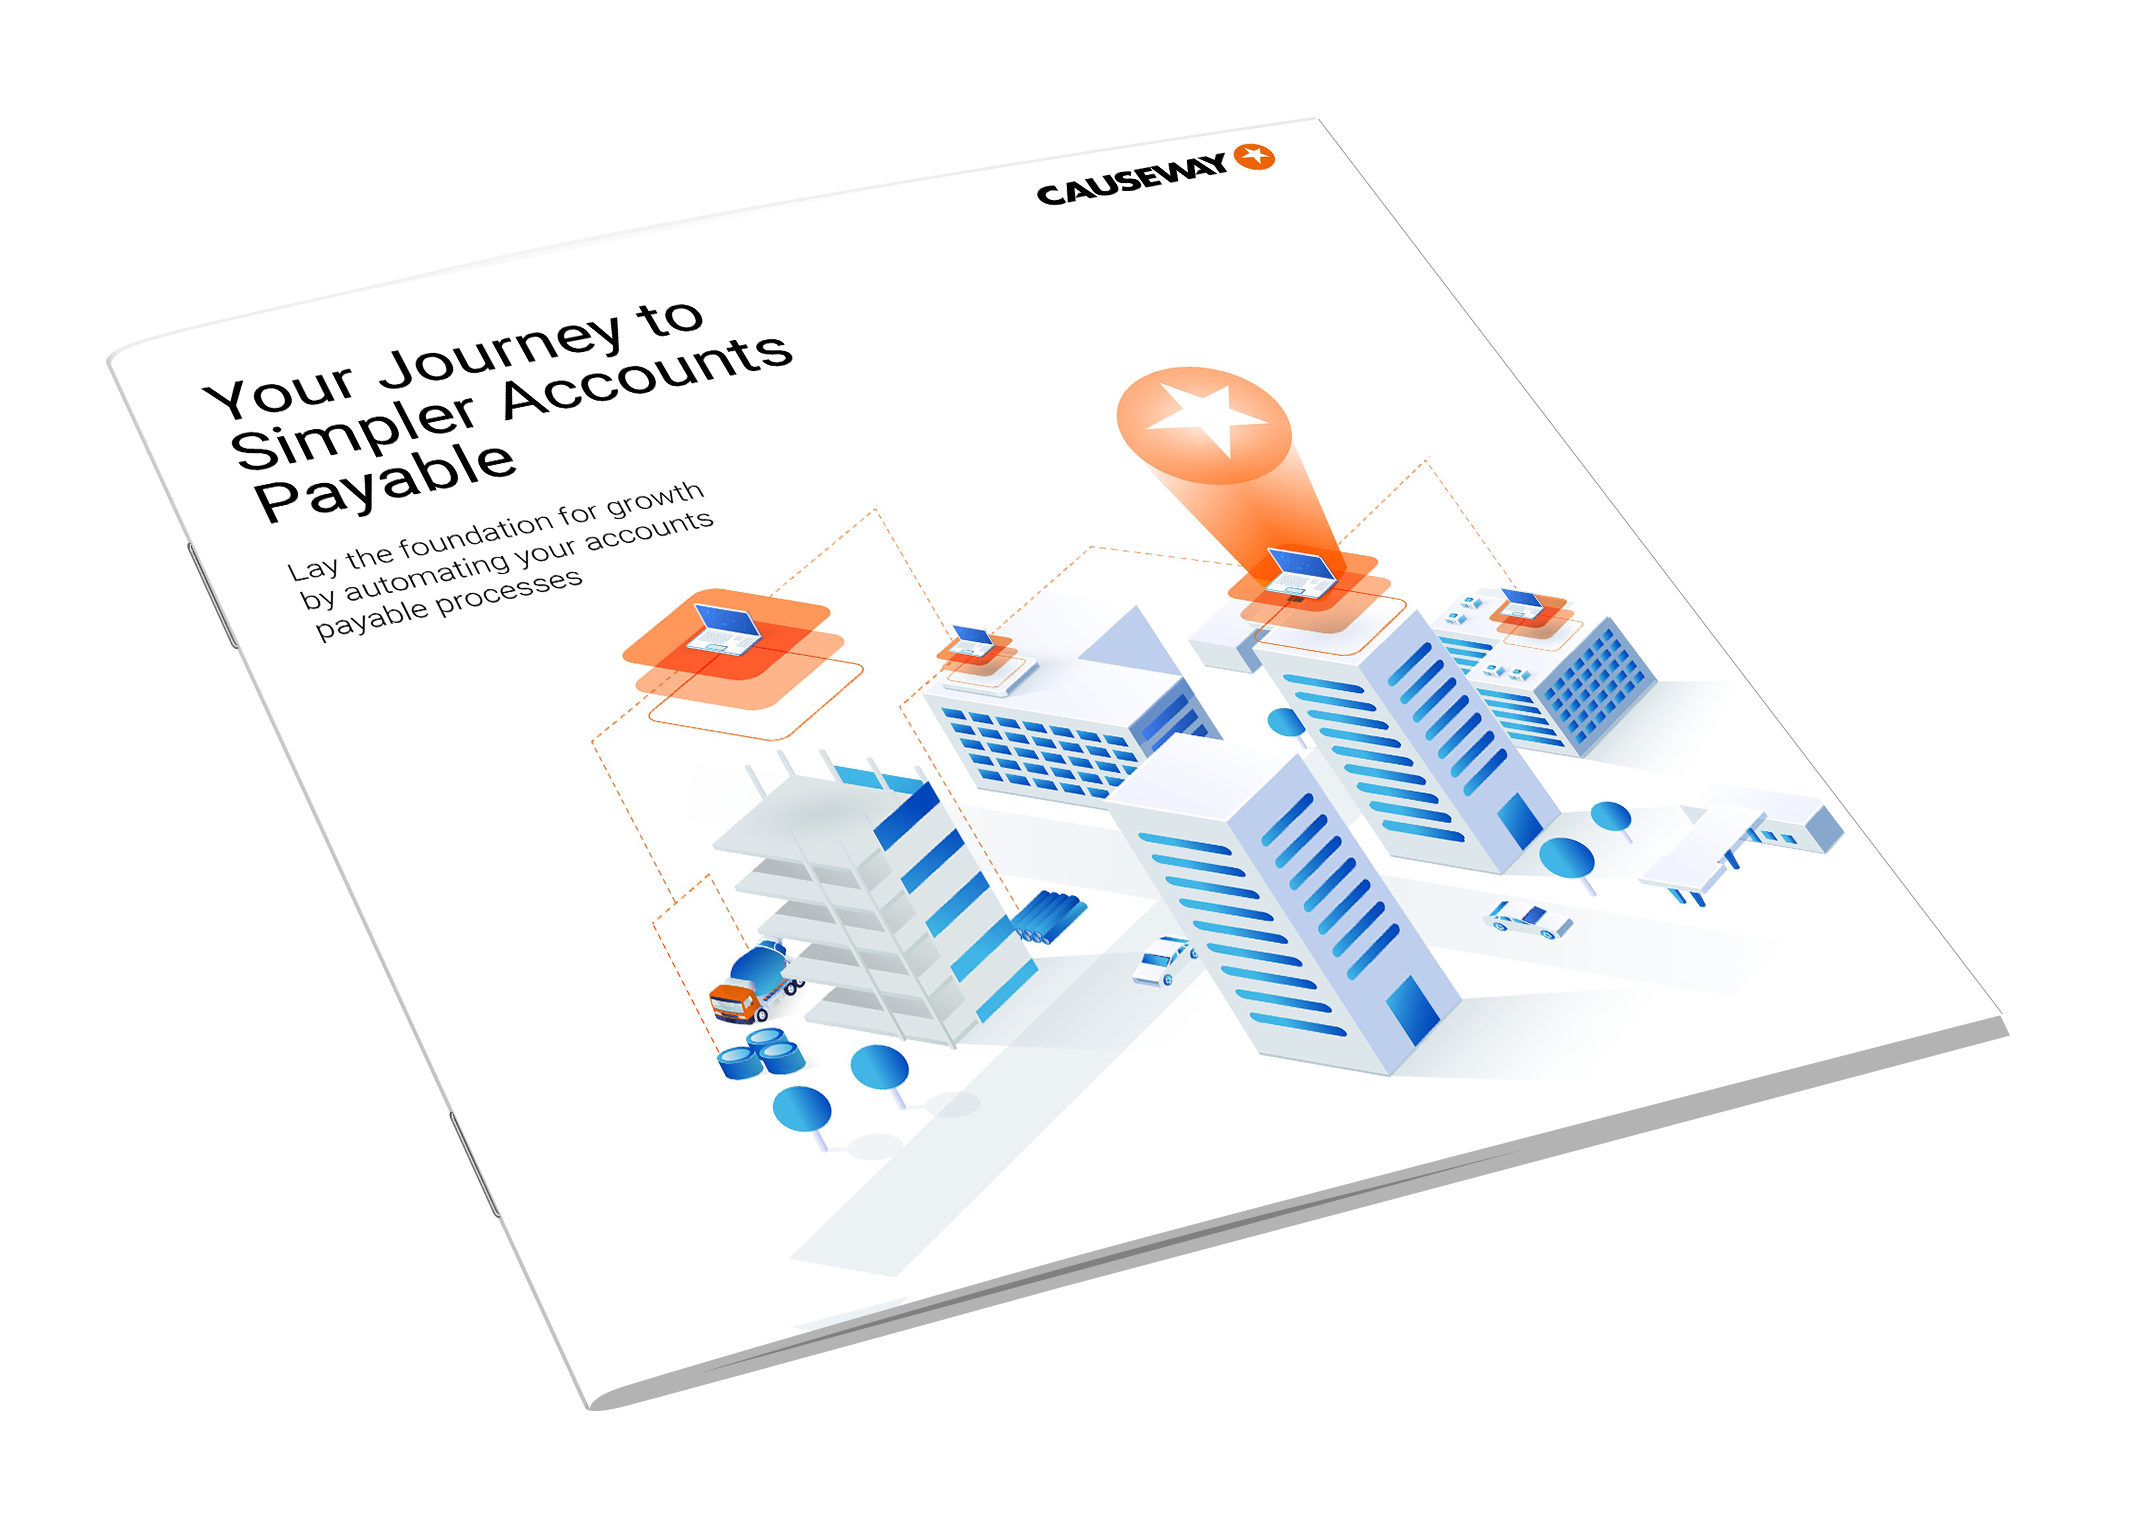 eBook: The Journey to Simpler Accounts Payable